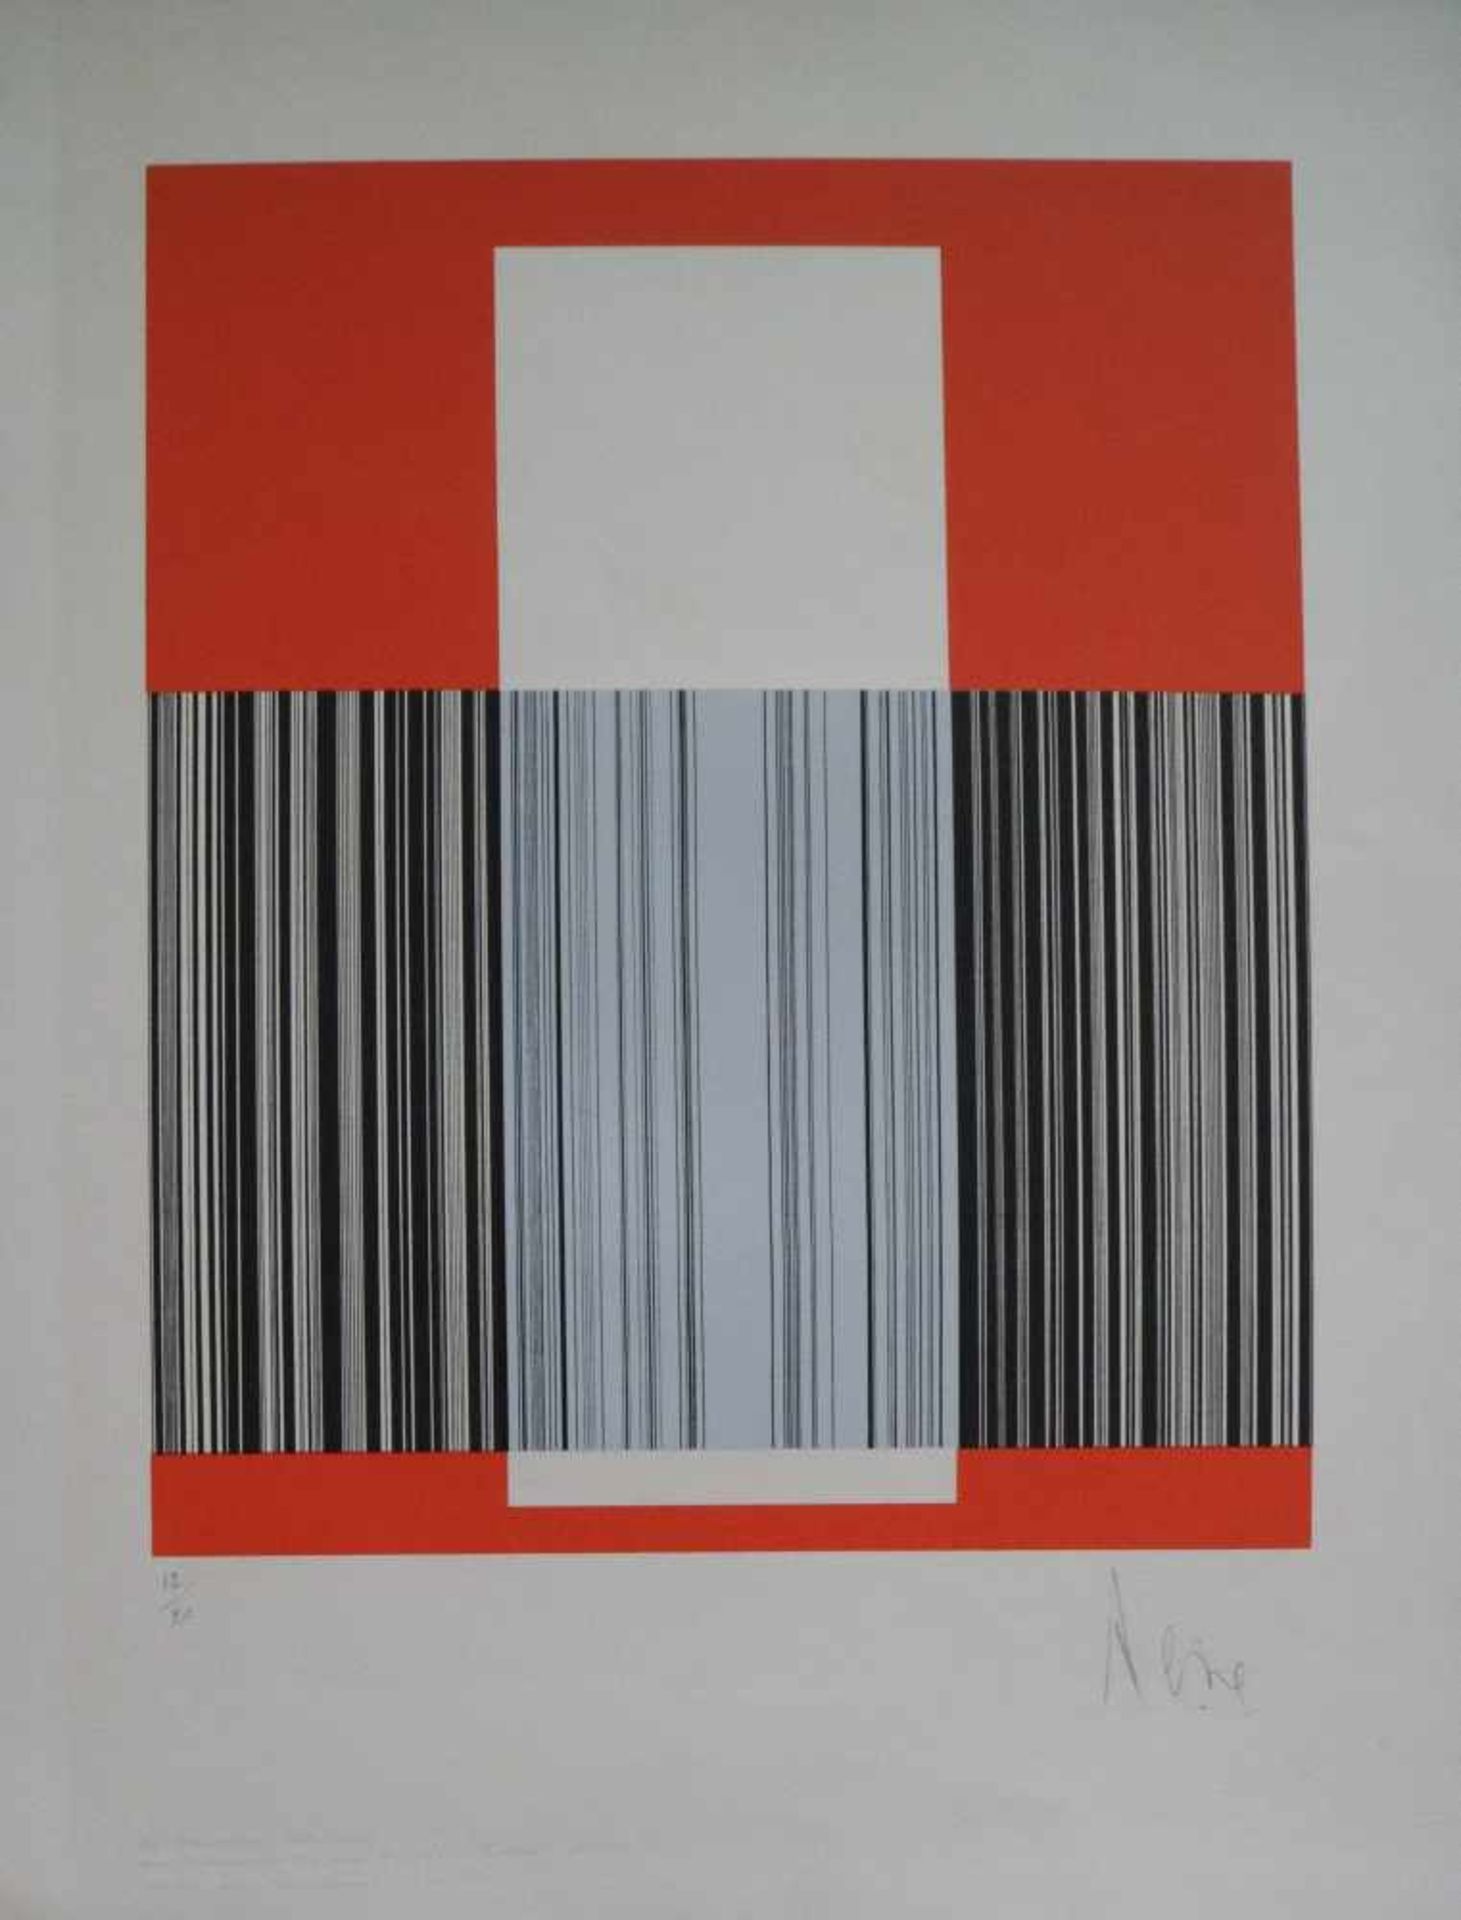 Luc PEIRE (1916-1994) Serigraph Untitled n ° 12/20 38 x 46 cm signed